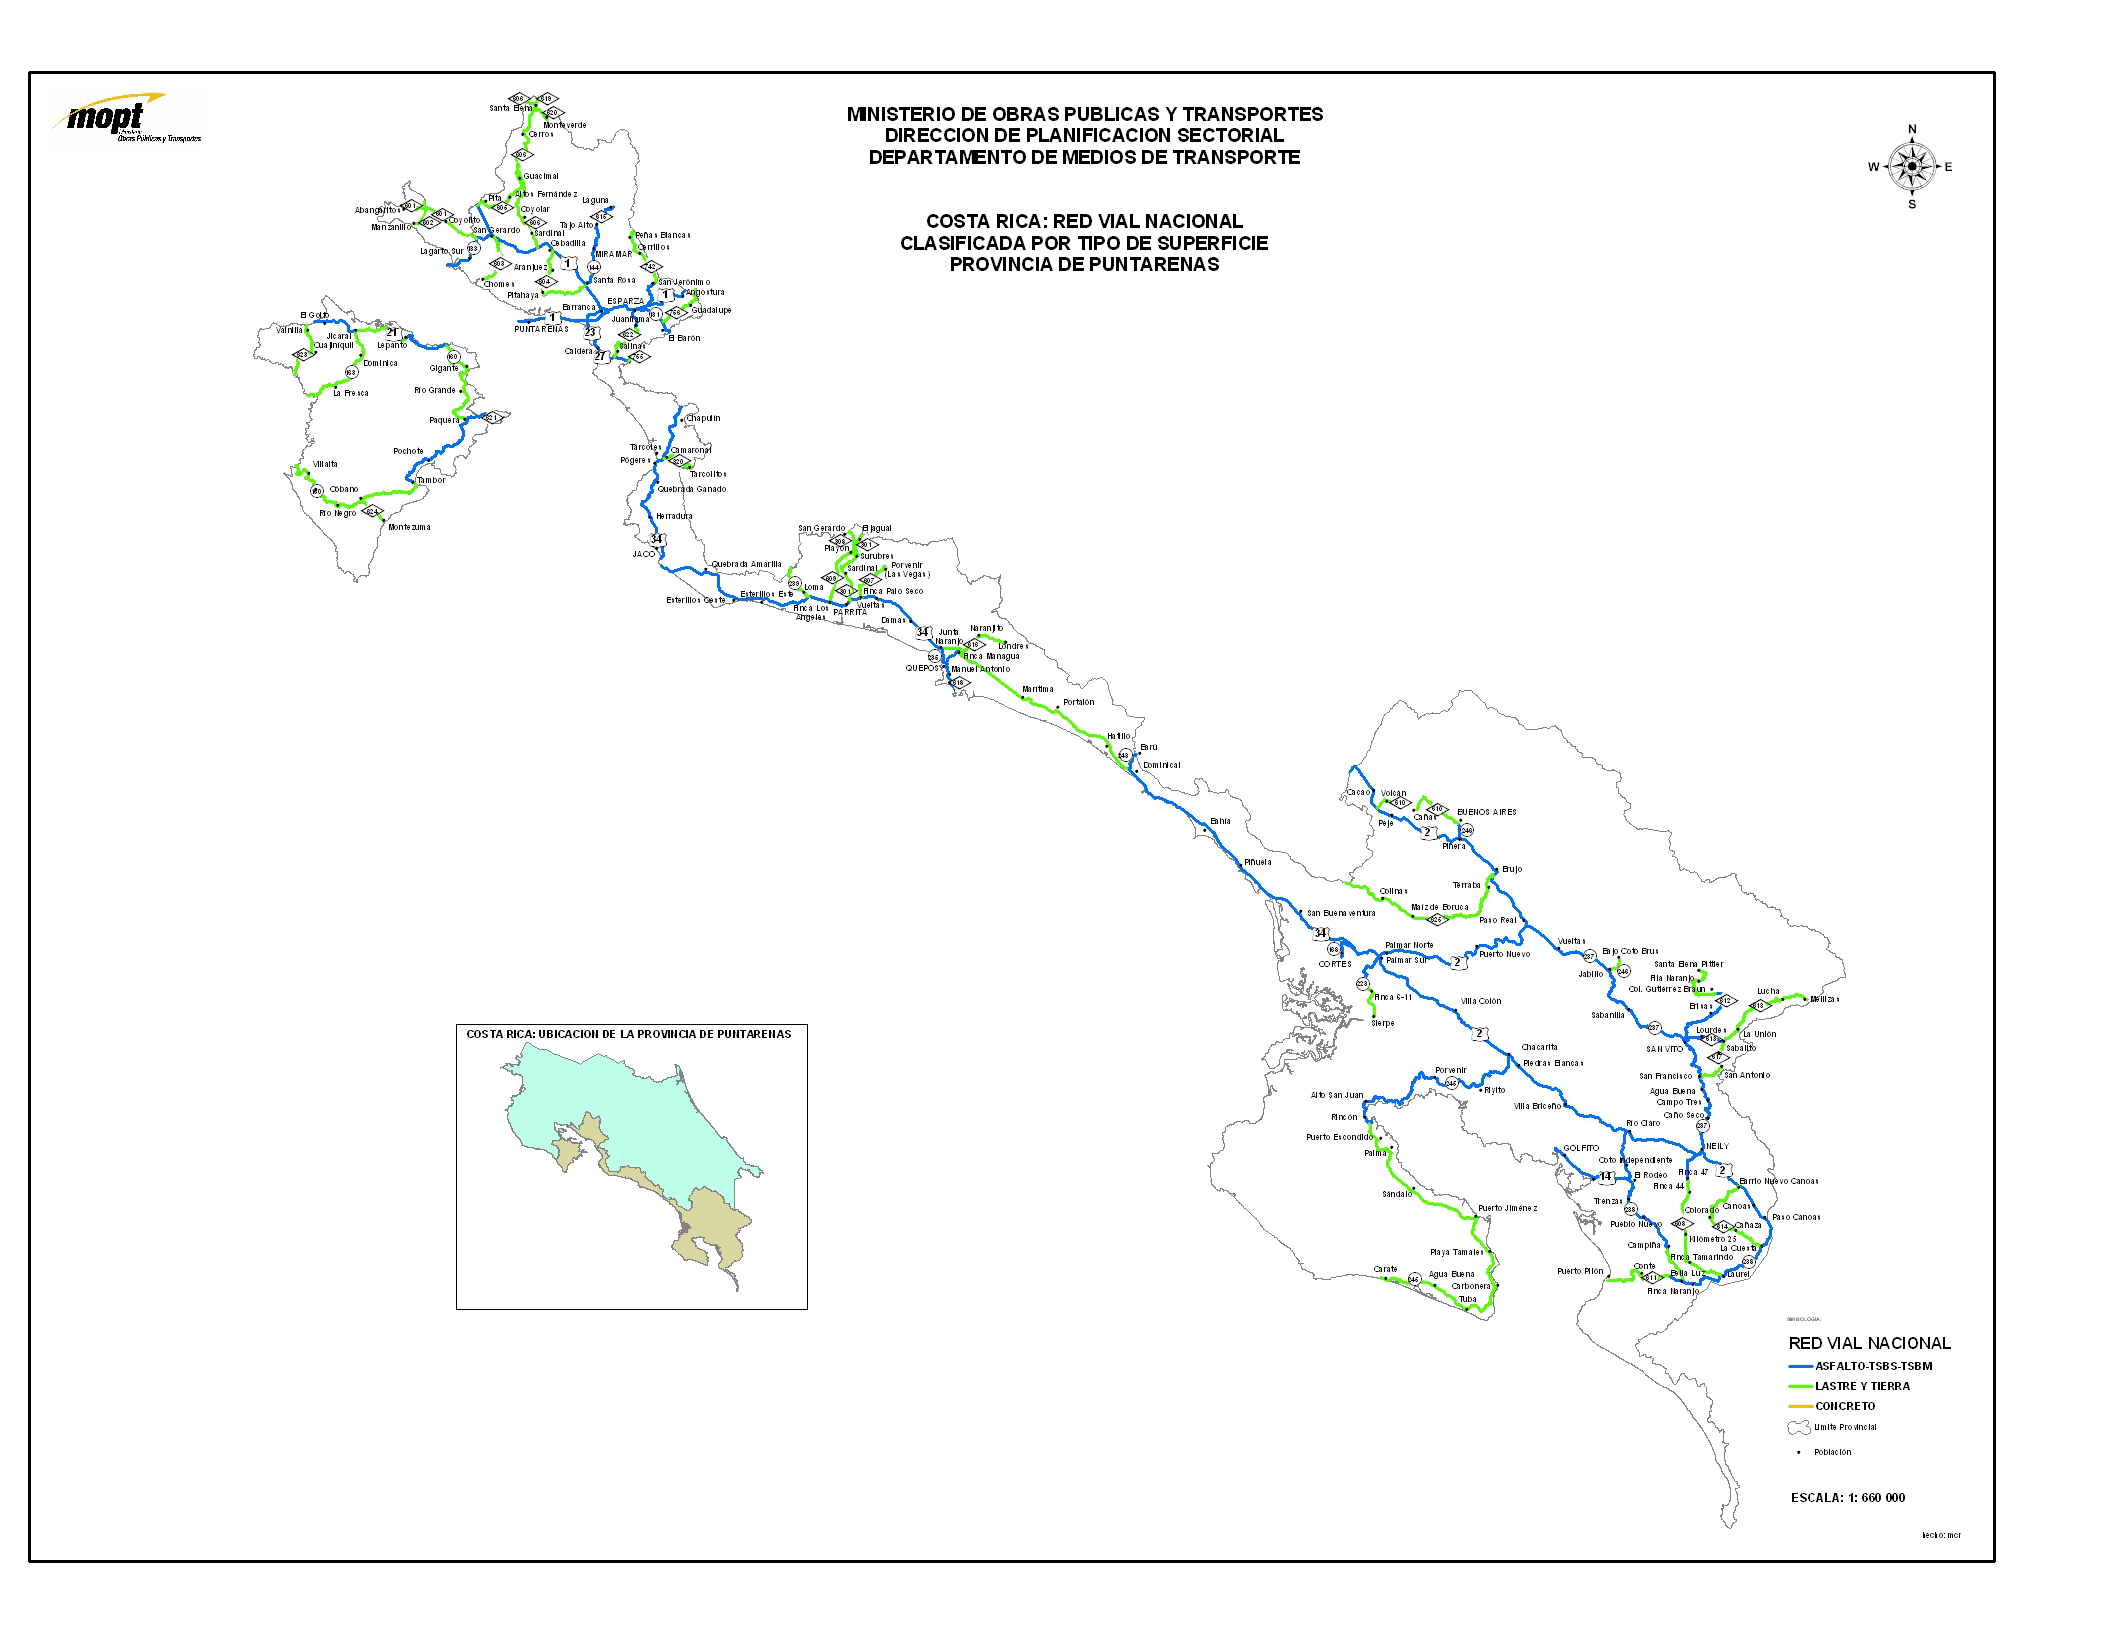 Puntarenas Province Roads, Type of Surface Map, Costa Rica